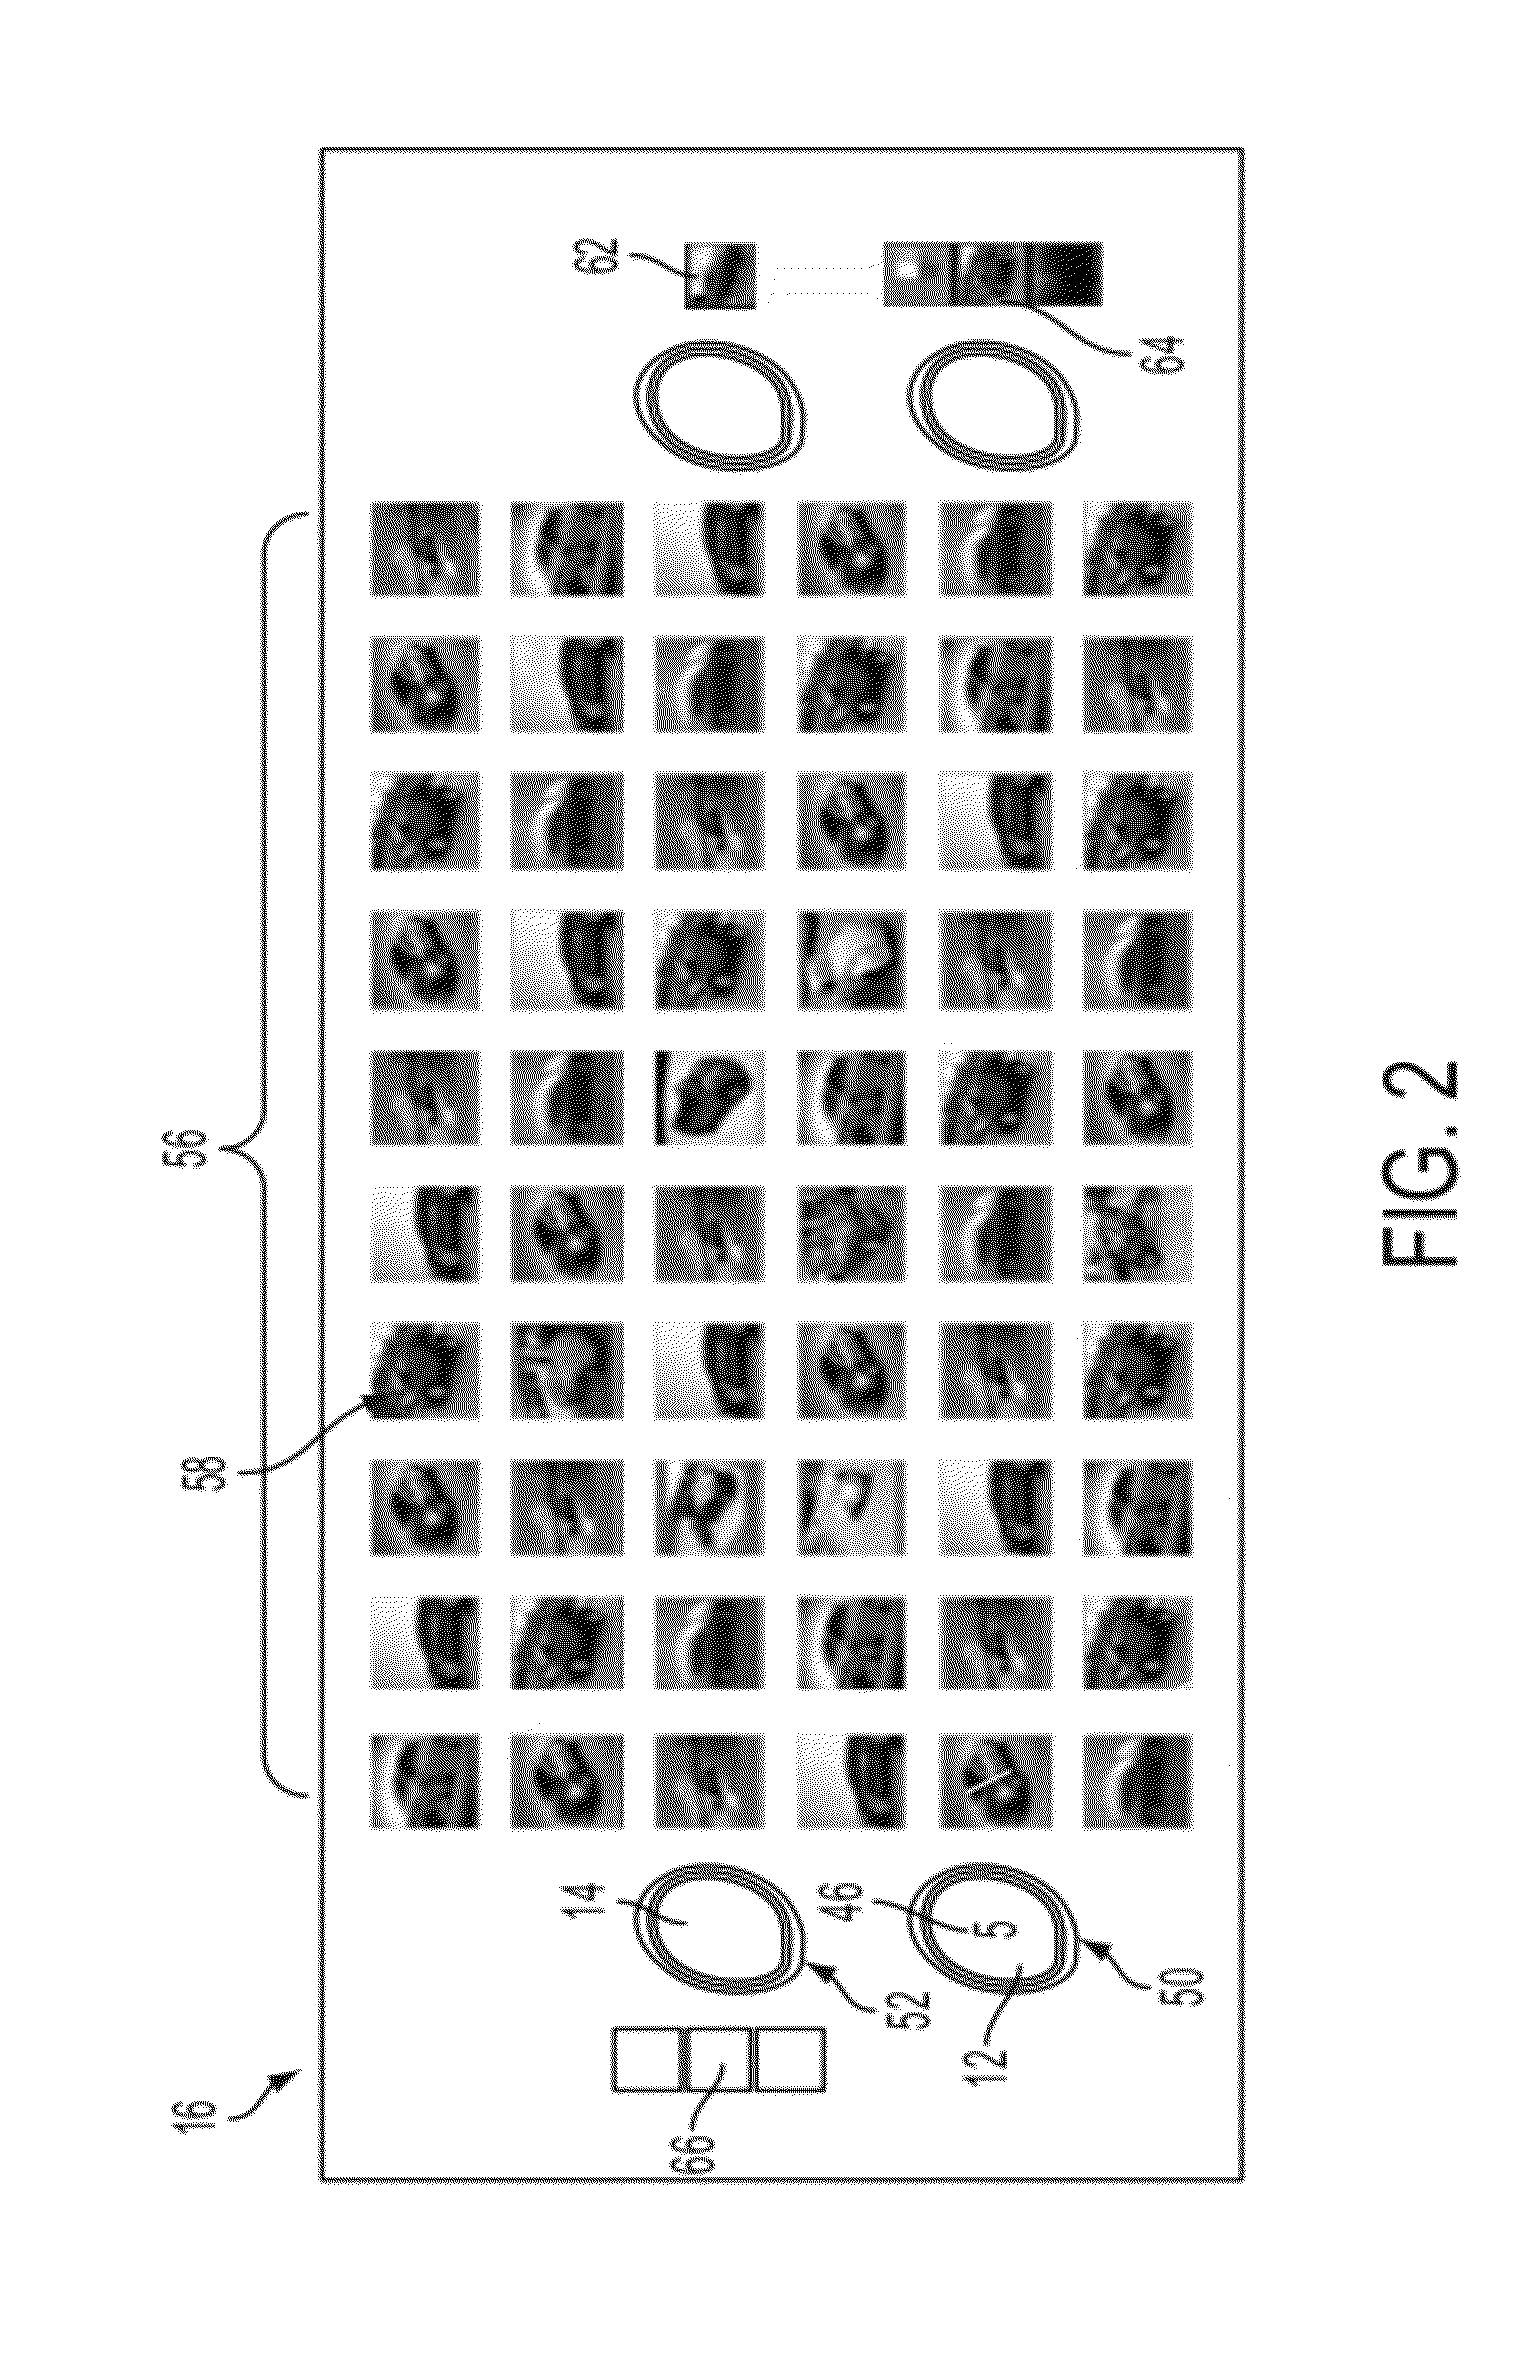 System and method for collaborative graphical searching with tangible query objects on a multi-touch table